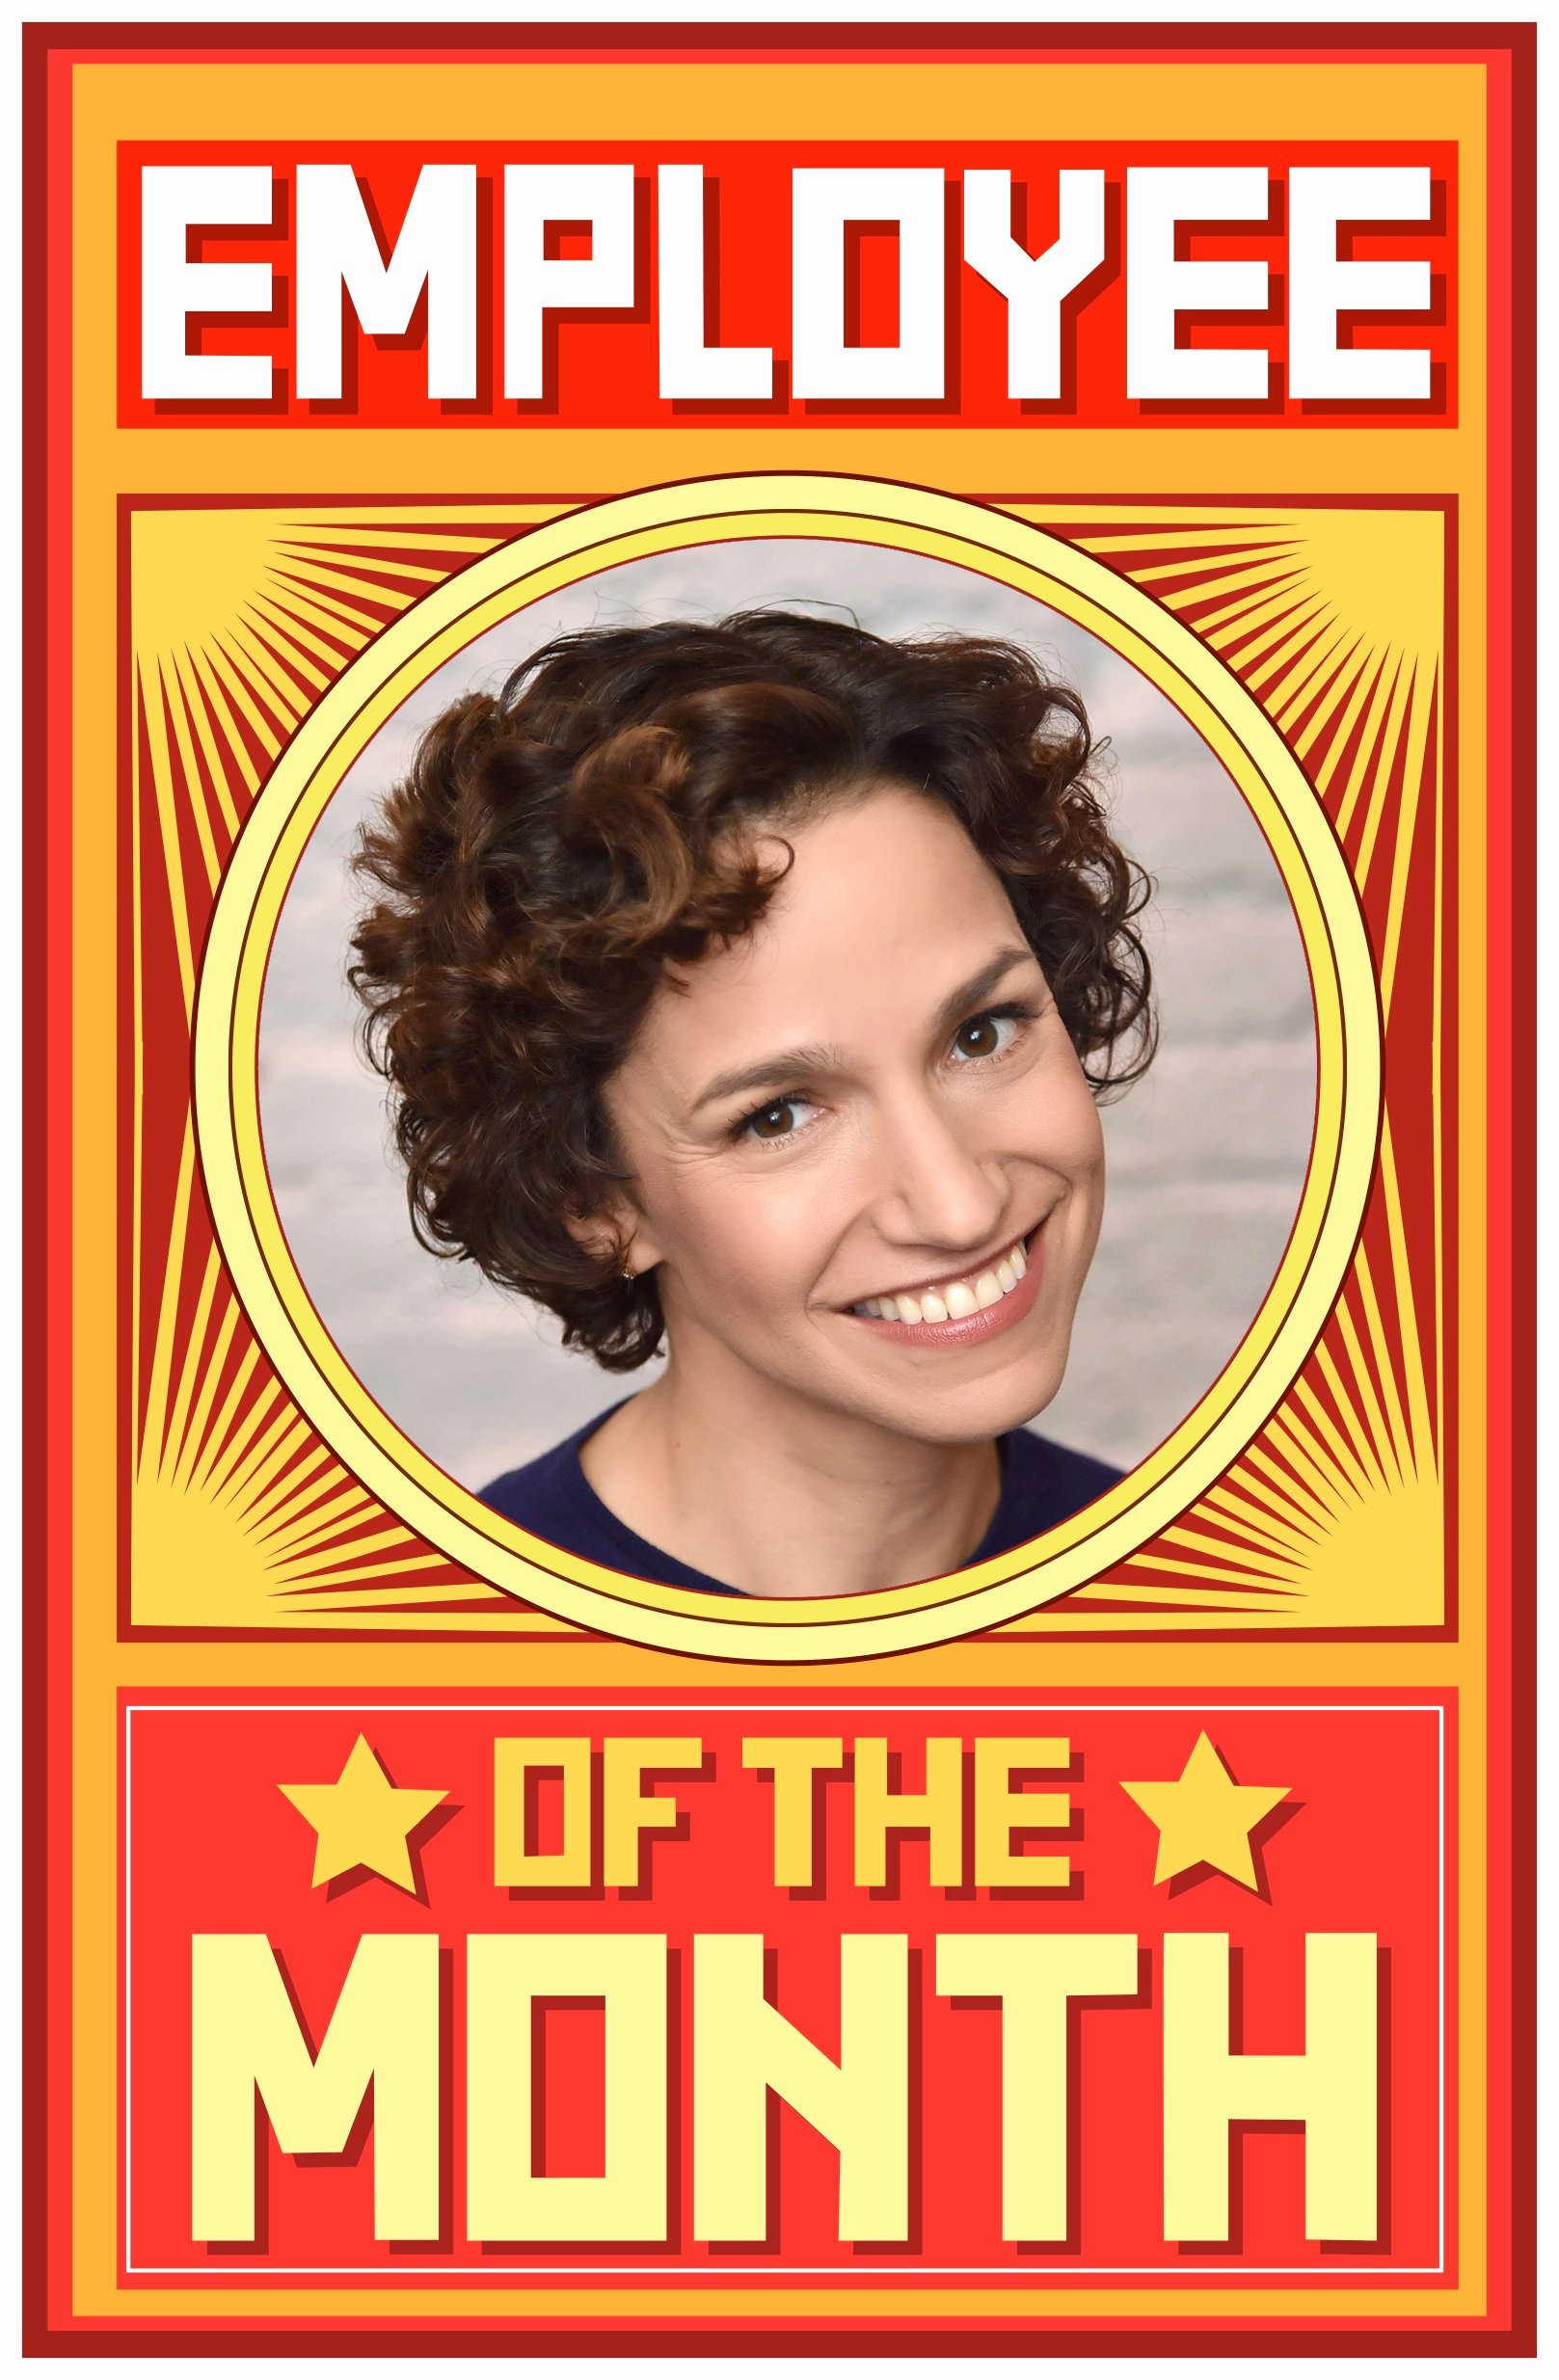 Employee Of the Month Frame Template Elegant Spotlight Employee Of the Month’s Catie Lazarus On